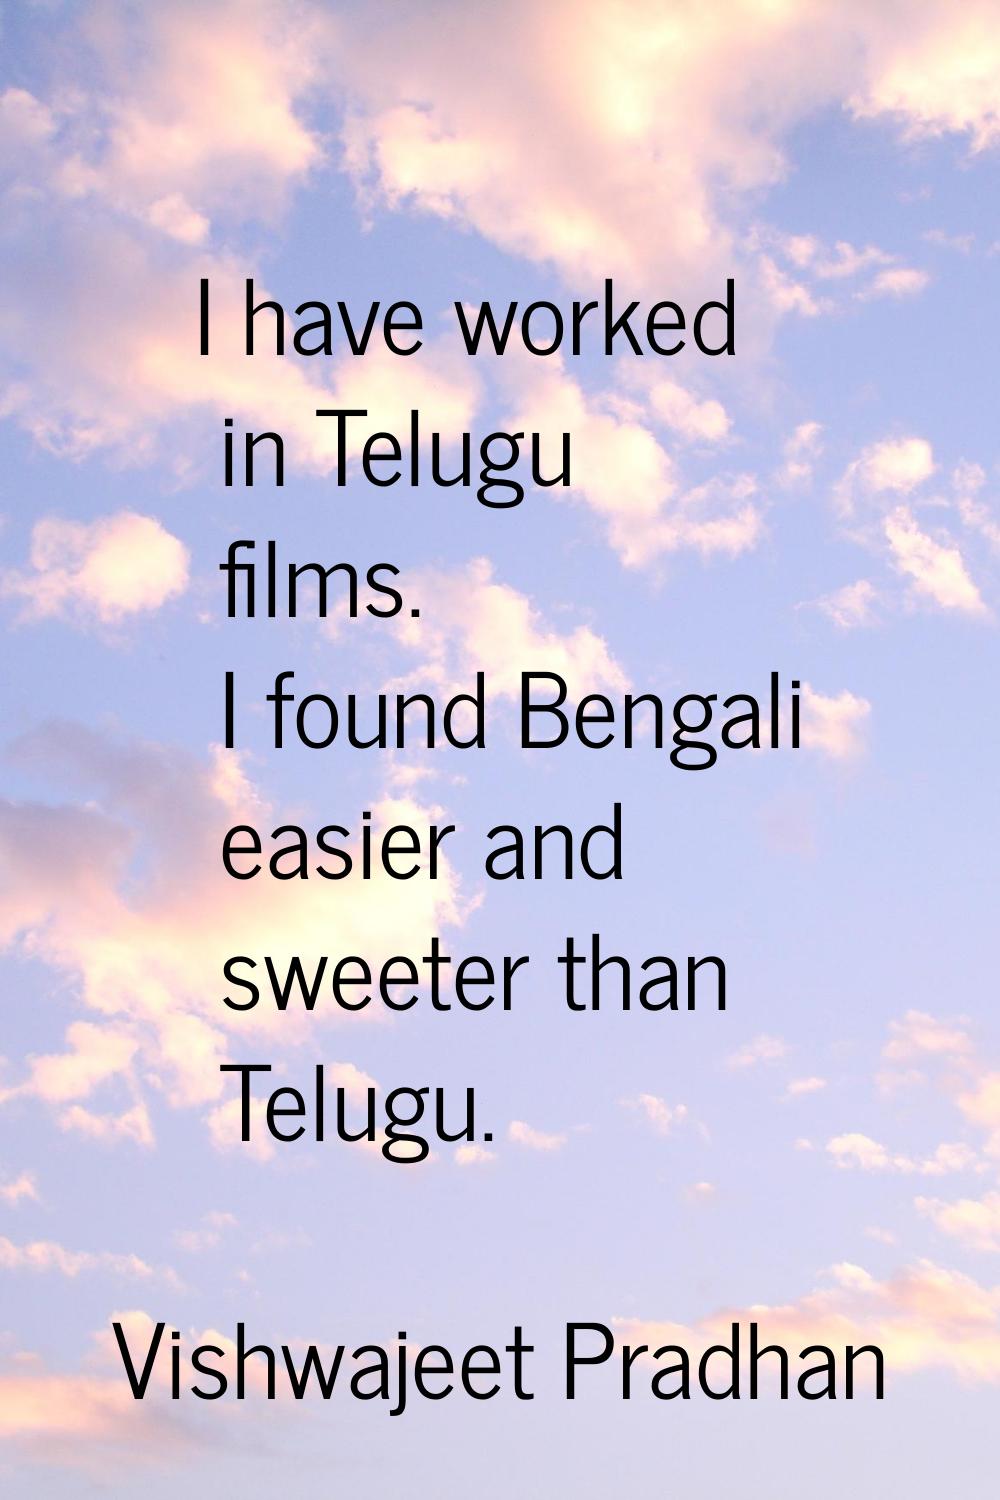 I have worked in Telugu films. I found Bengali easier and sweeter than Telugu.